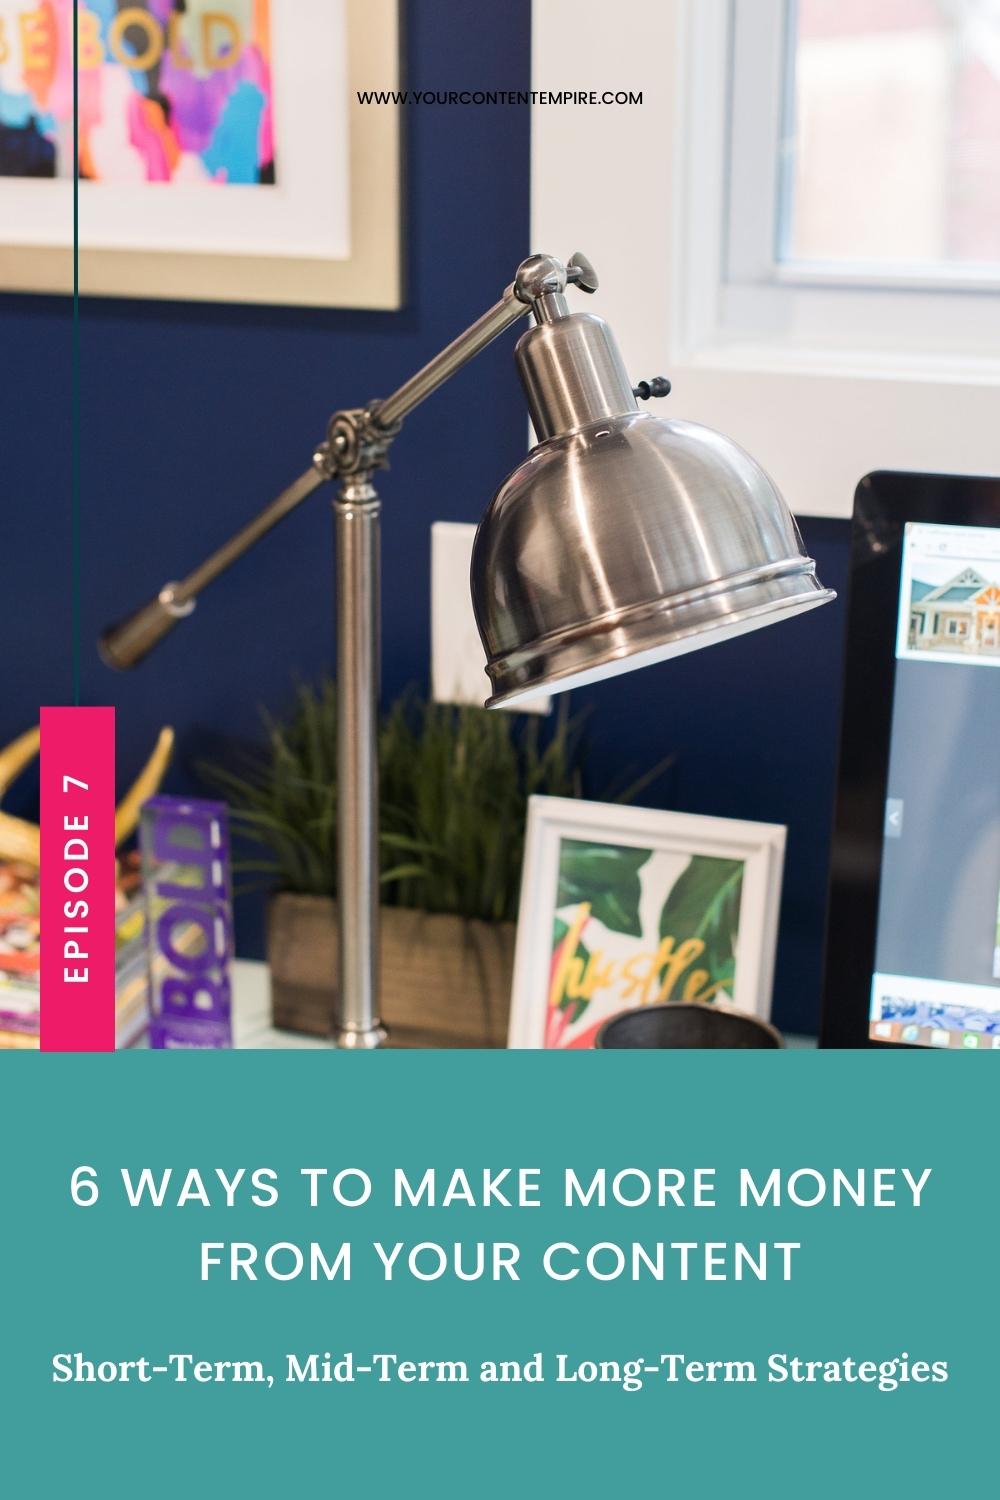 6 Ways to Make More Money from Your Content from Your Content Empire and Hailey Dale